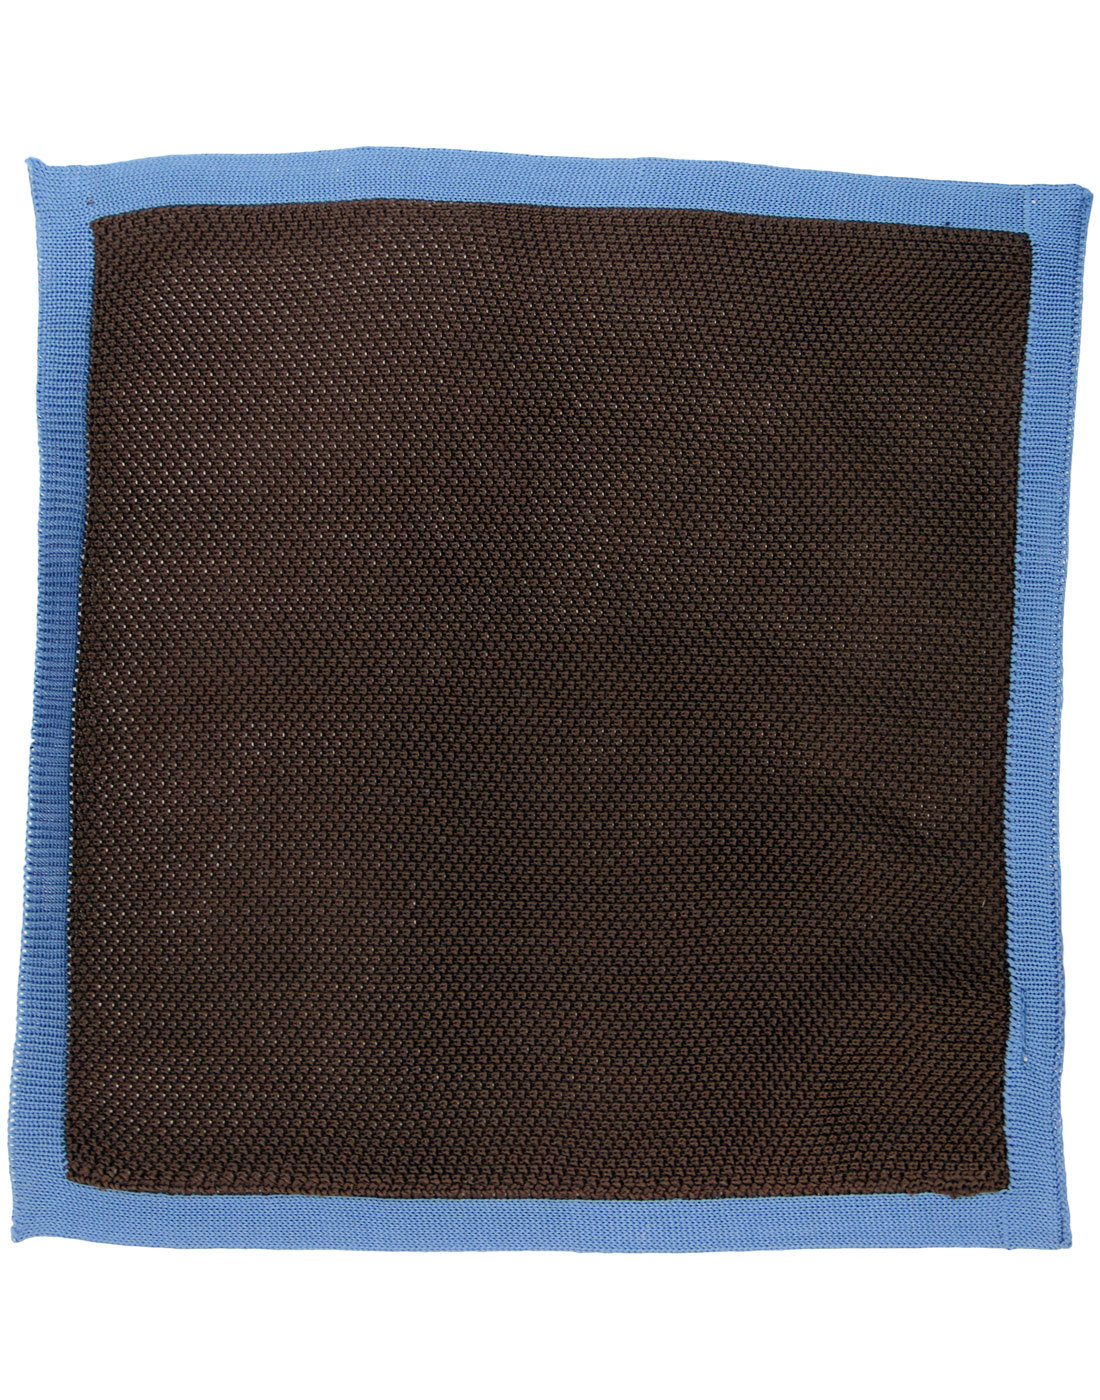 GIBSON LONDON Mod Knitted Pocket Square BROWN/BLUE